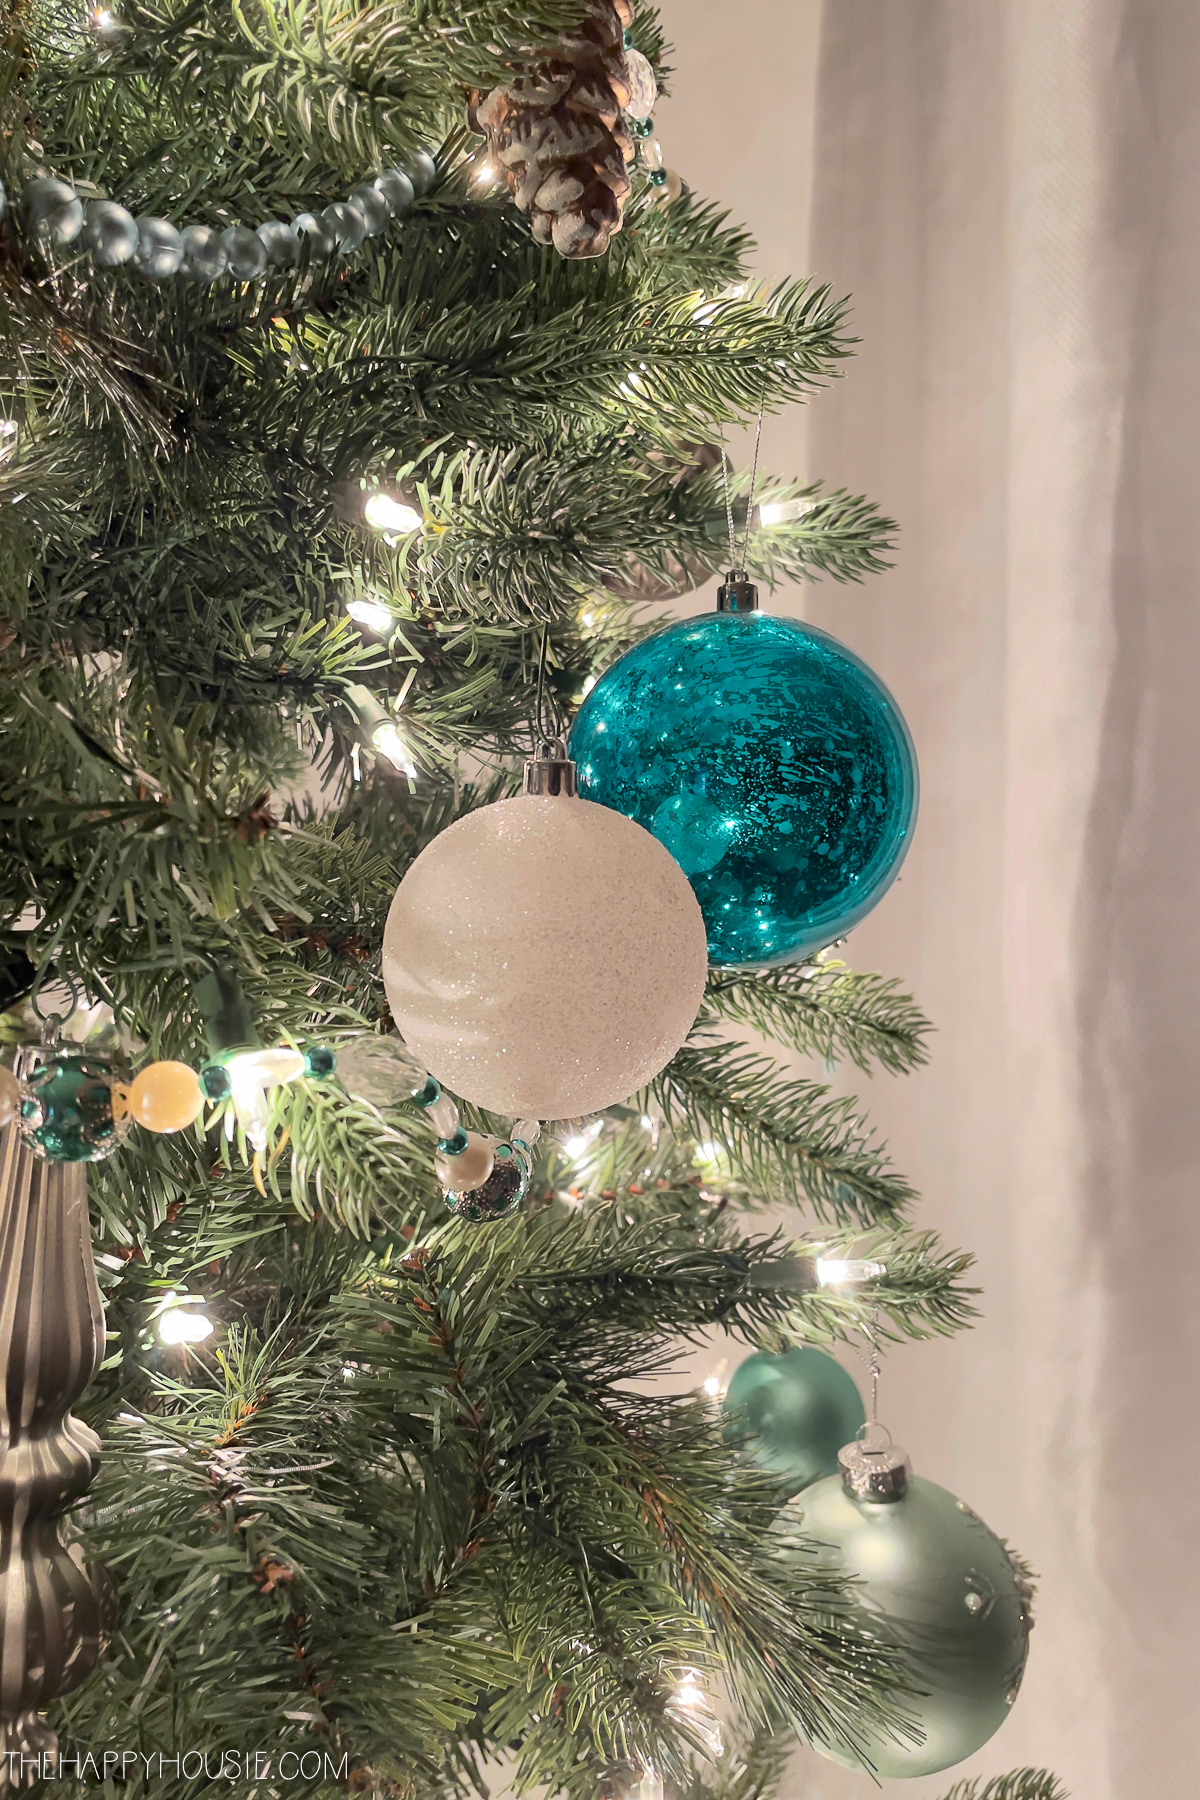 teal and white ornaments on a Christmas tree